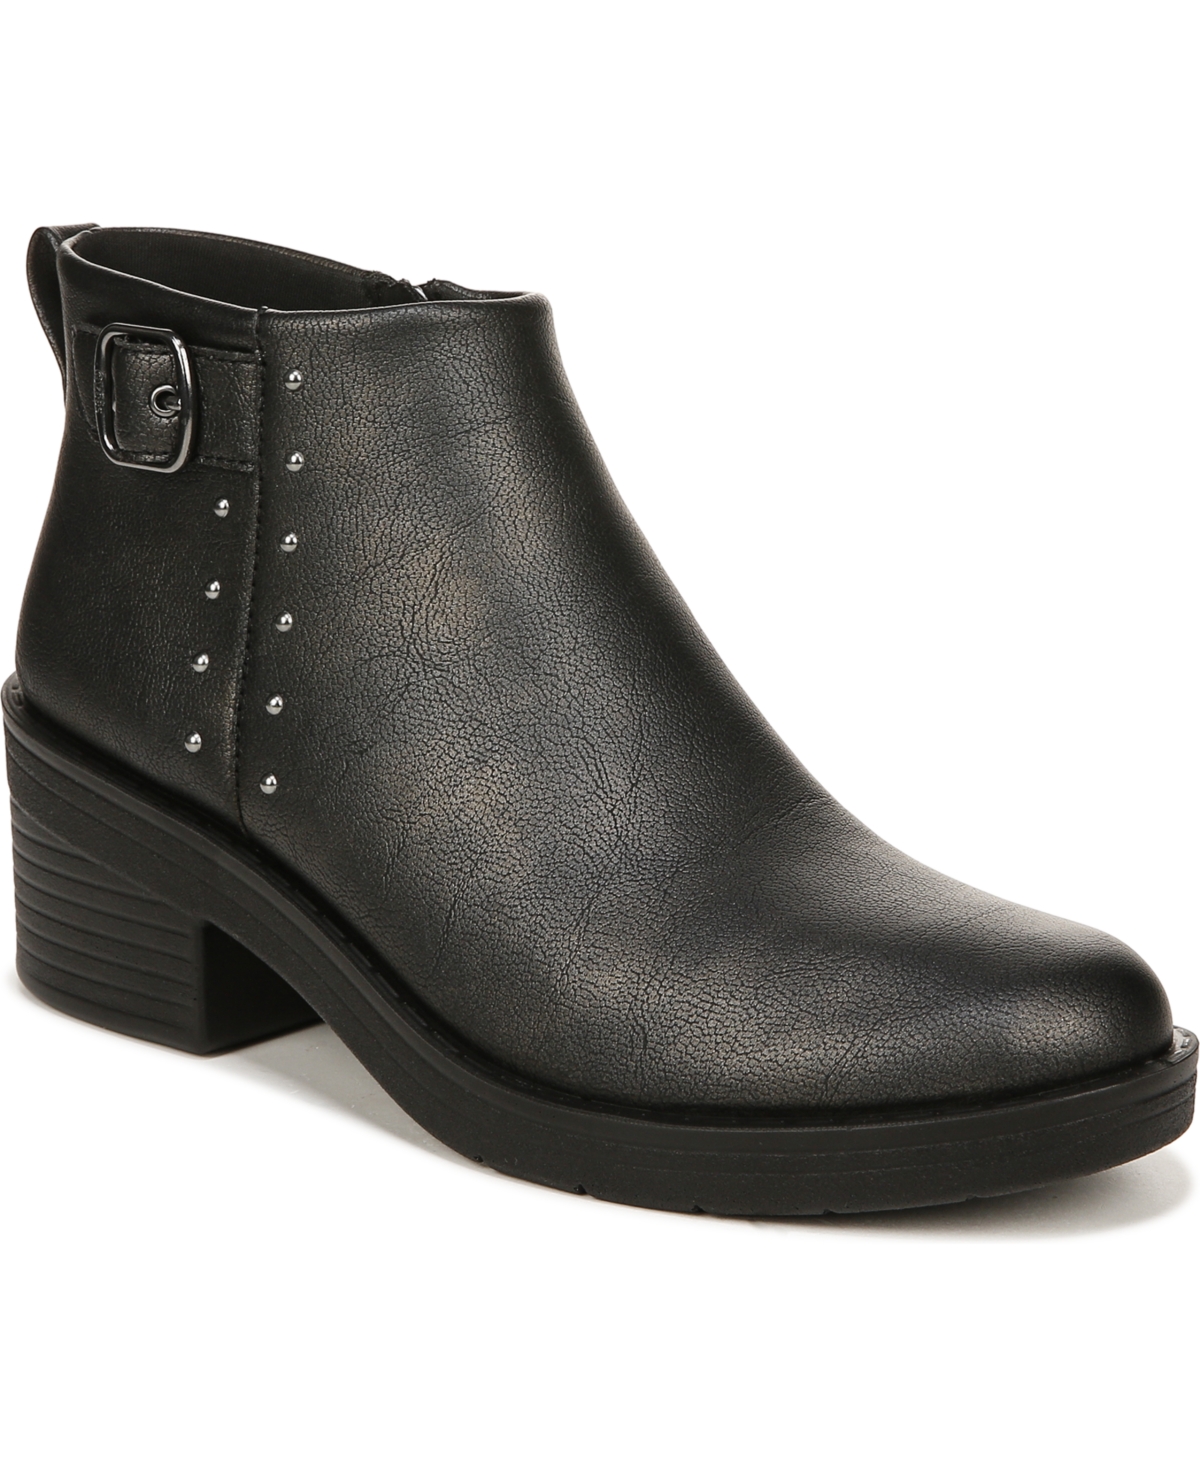 Premium Other Half Washable Booties - Black Faux Leather